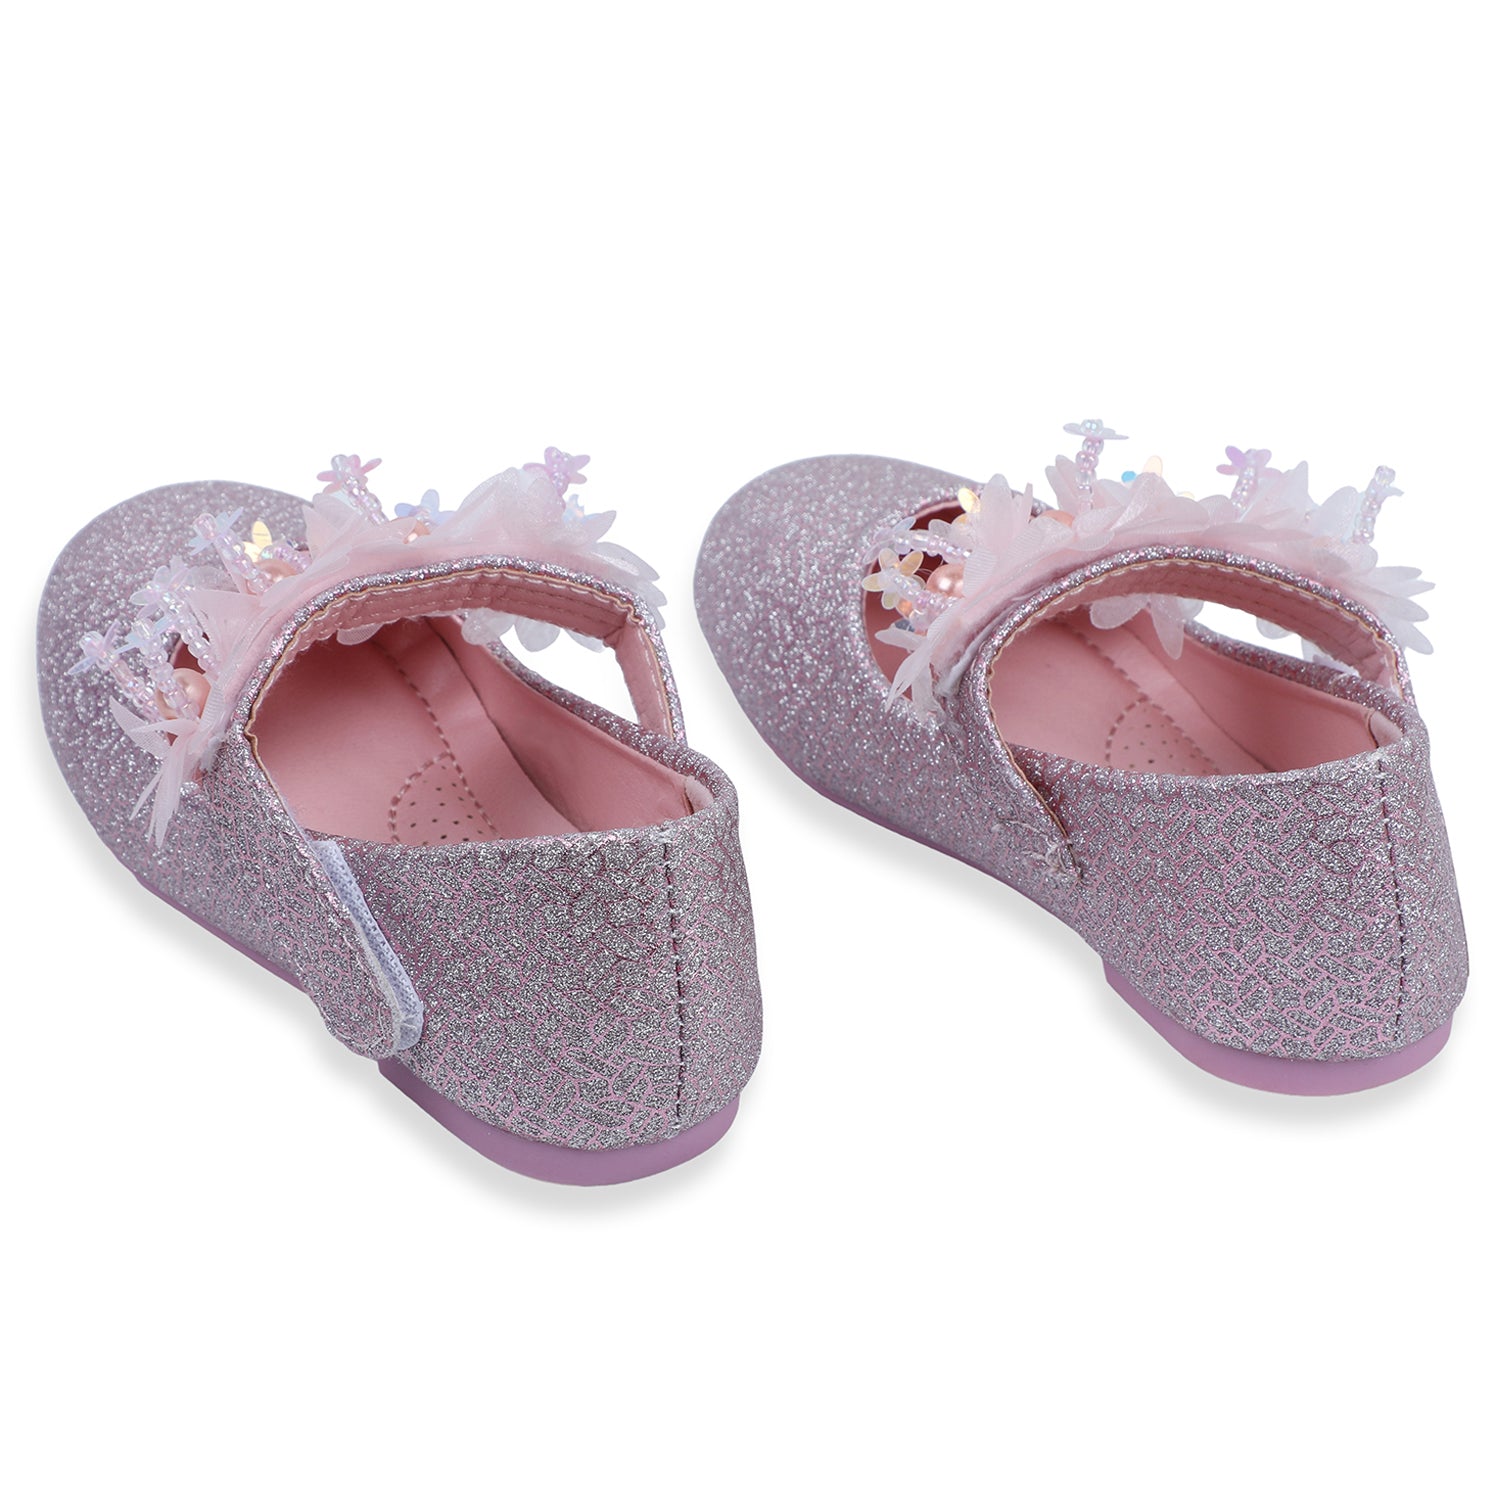 Baby Moo x Bash Kids Shiny Floral Applique Mary Jane Ballerinas - Pink